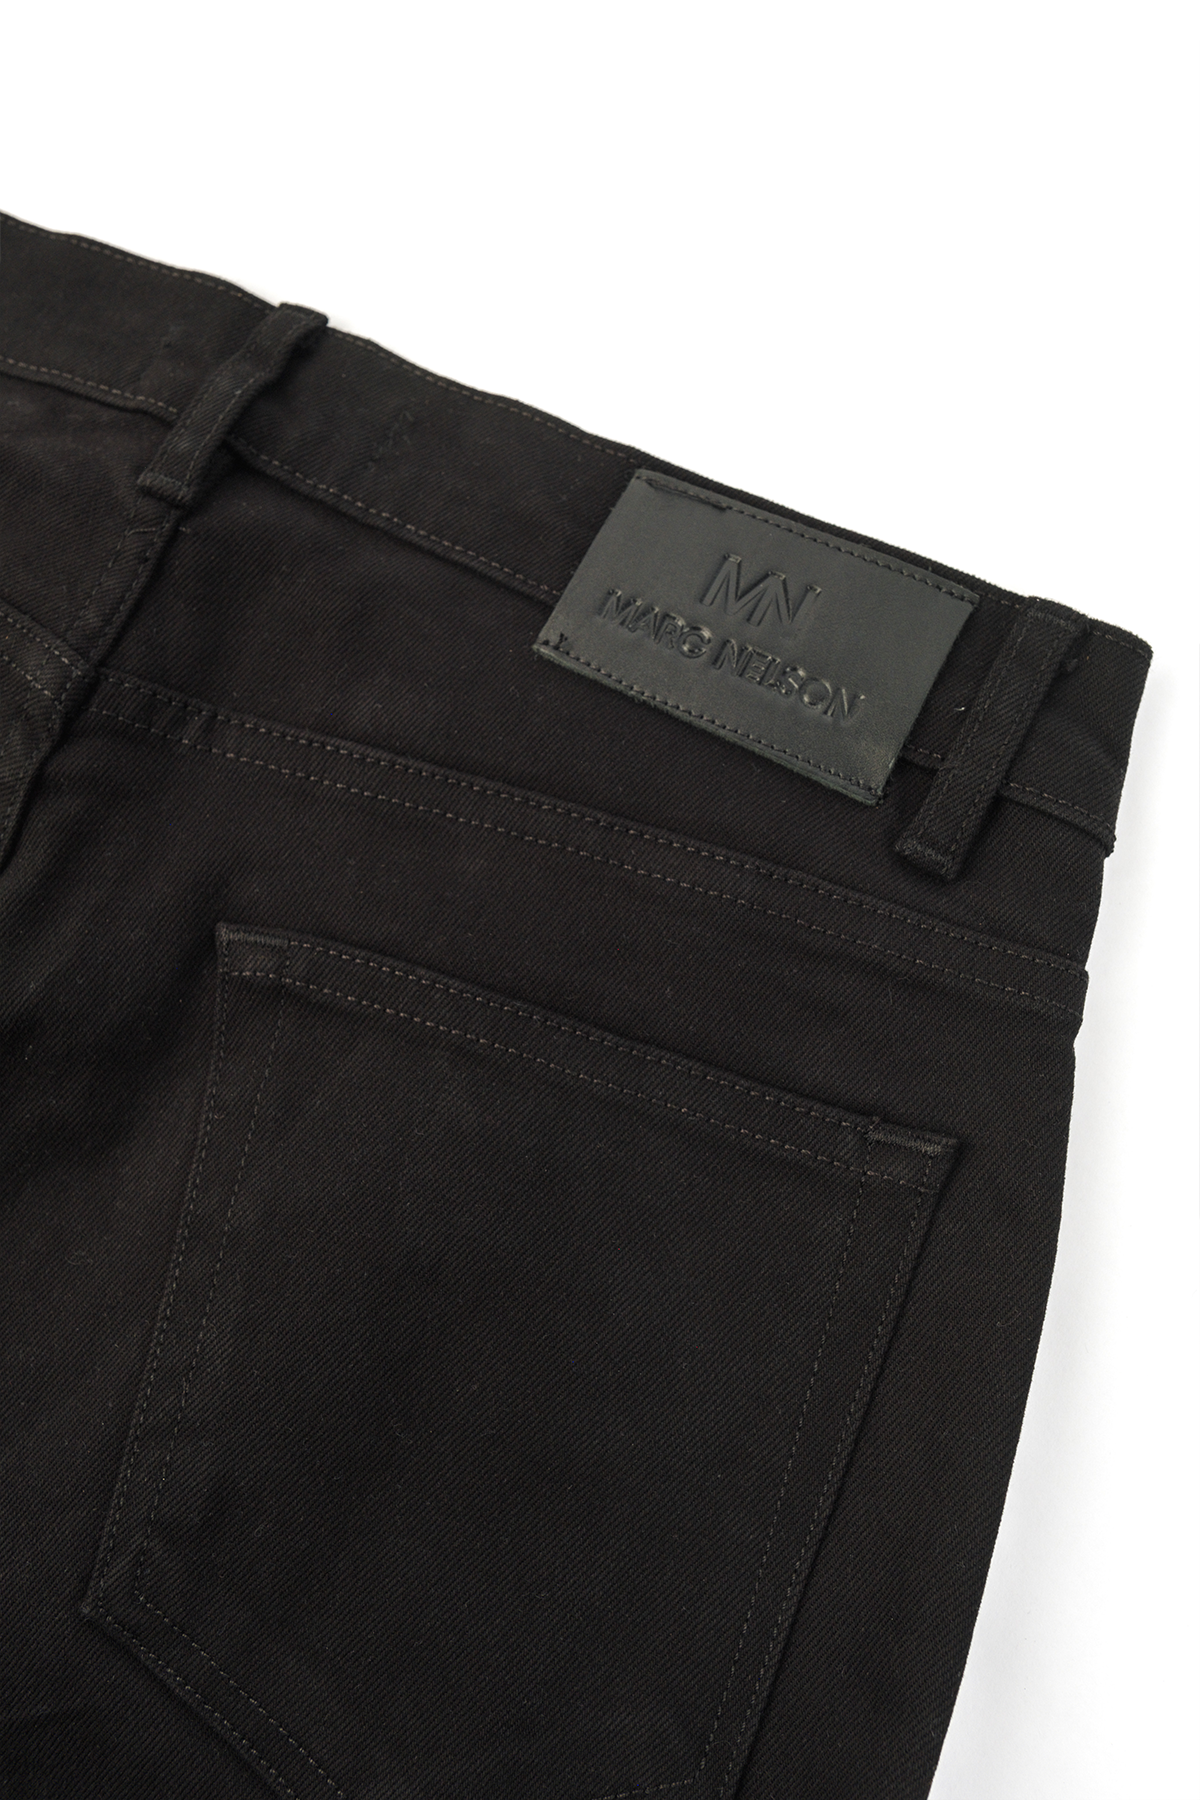 Close up photo of the backside of black denim displaying the leather tag and pockets. 